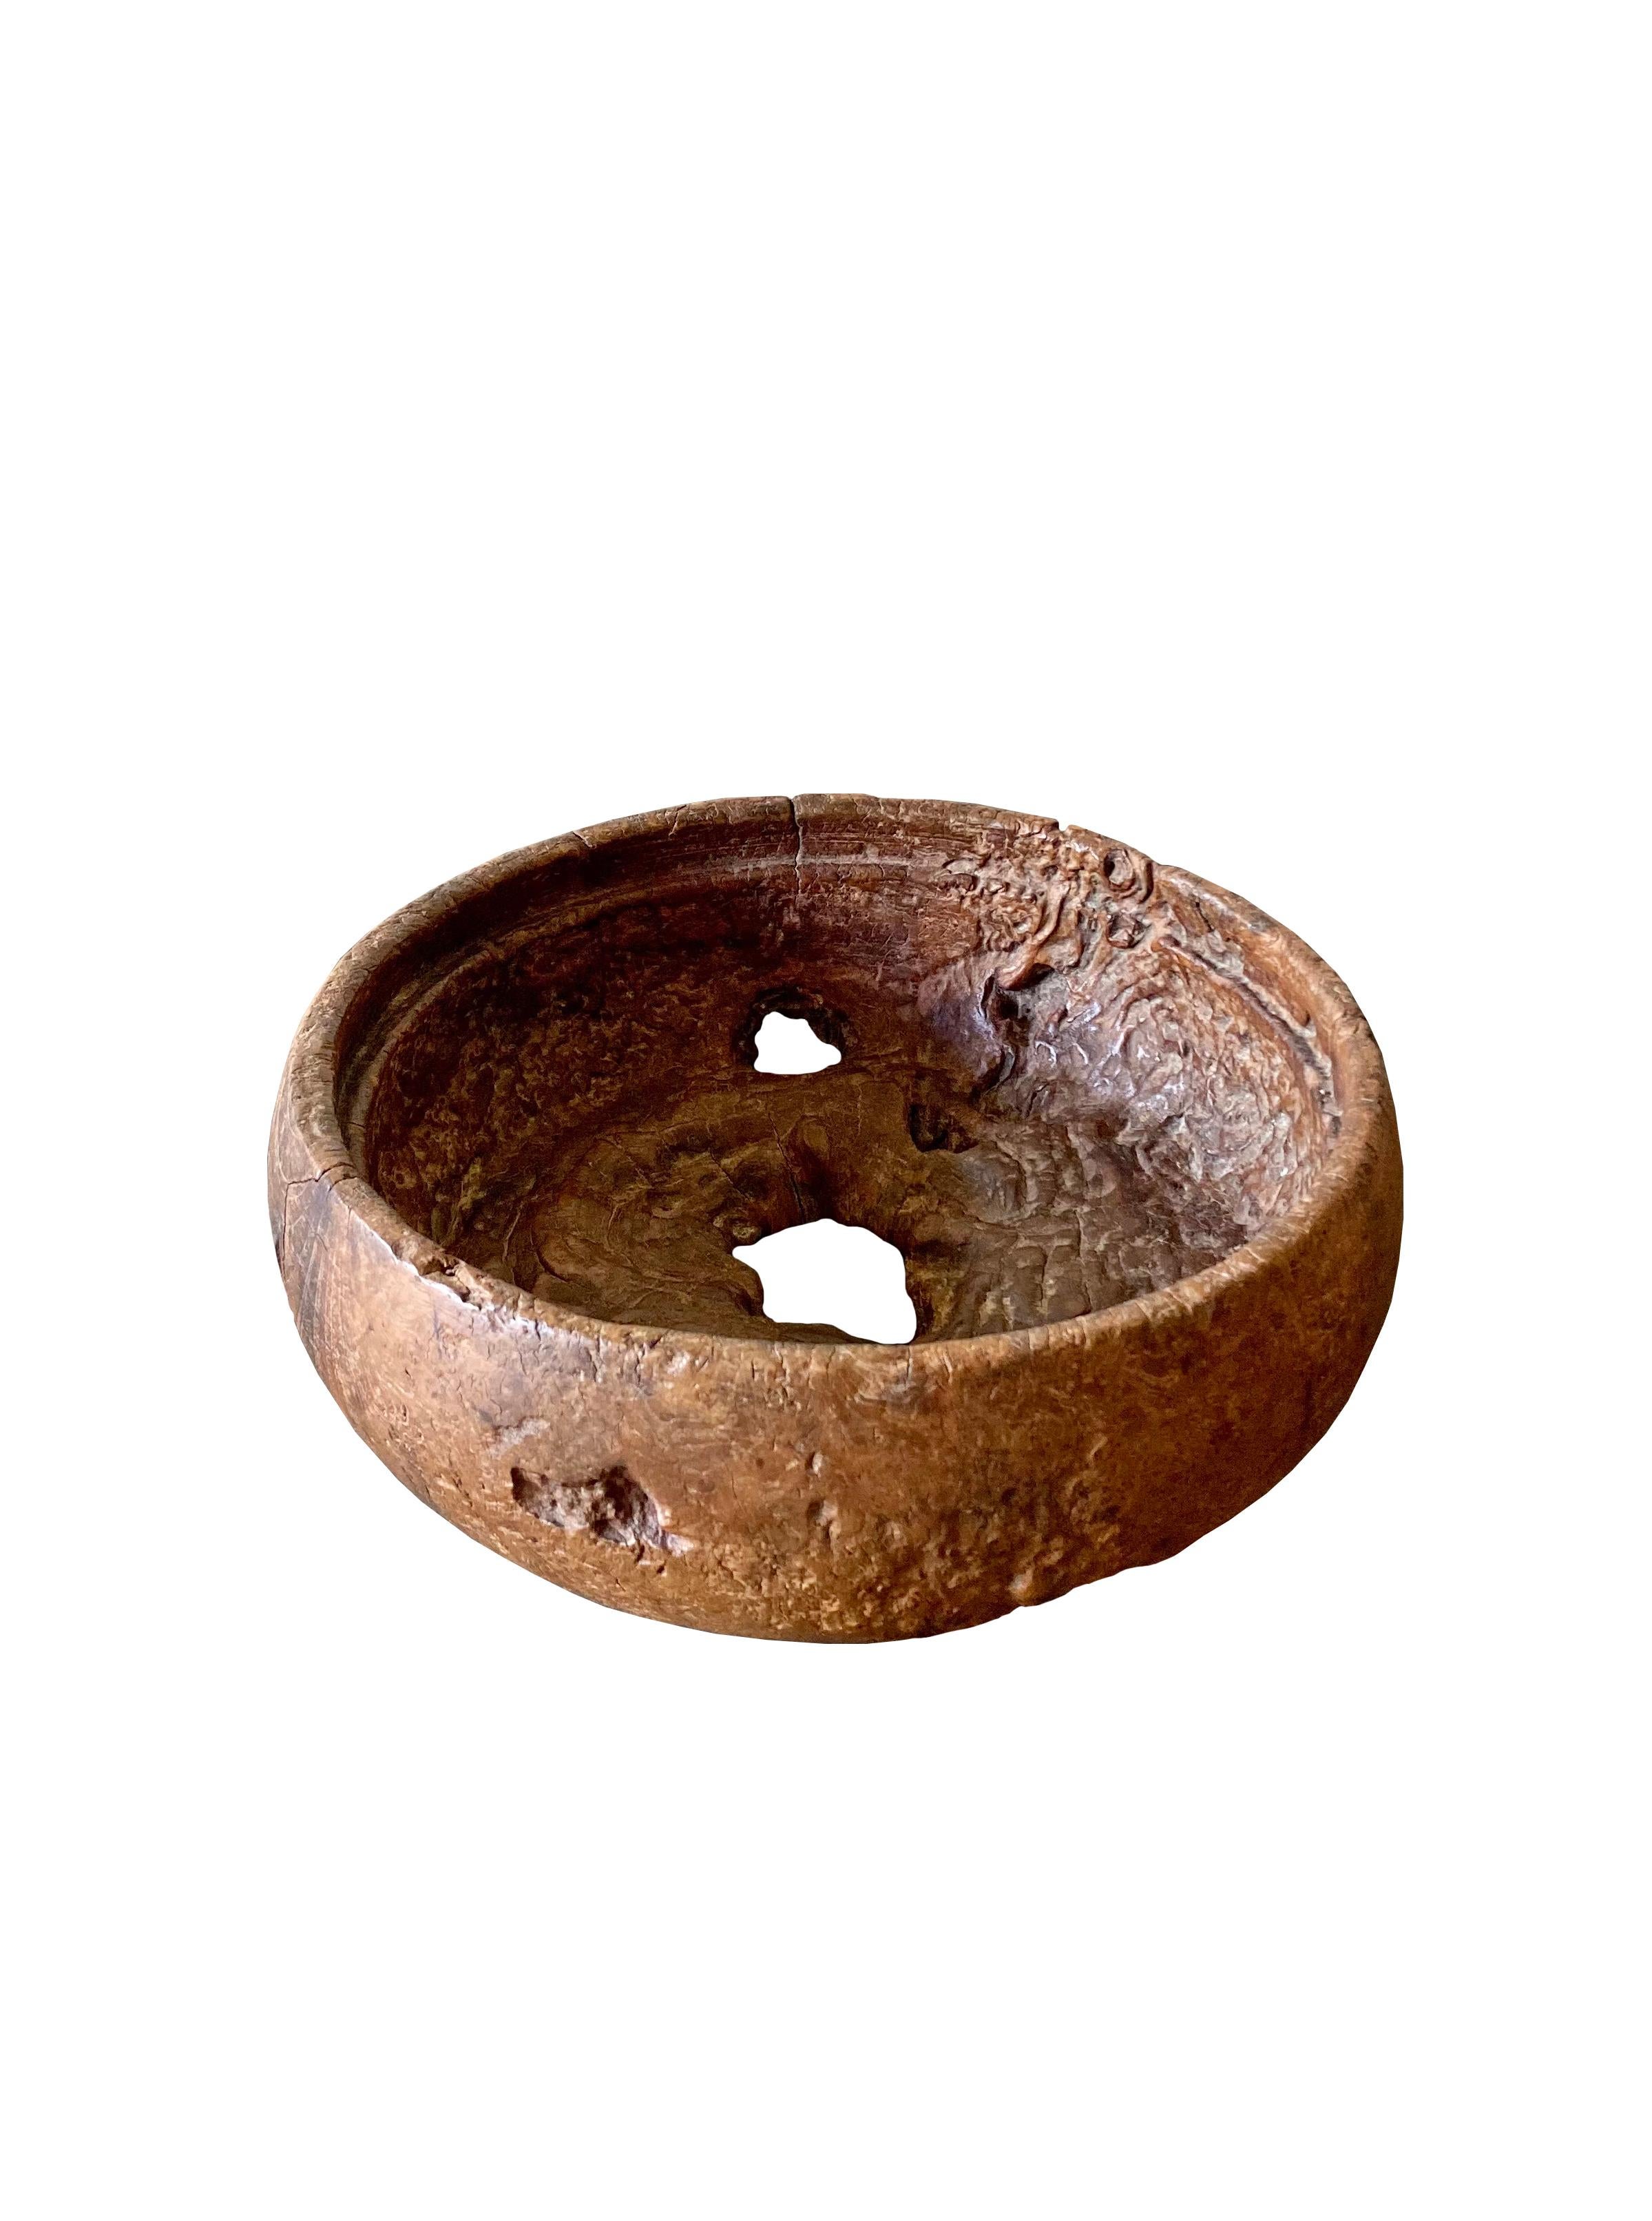 A teak burl wood bowl crafted on the island of Java, Indonesia. The bowl was cut from a much larger slab of burl wood and maintains an organic shape and natural texture. The multiple holes and indents contribute to its appeal. 

Dimensions: Height